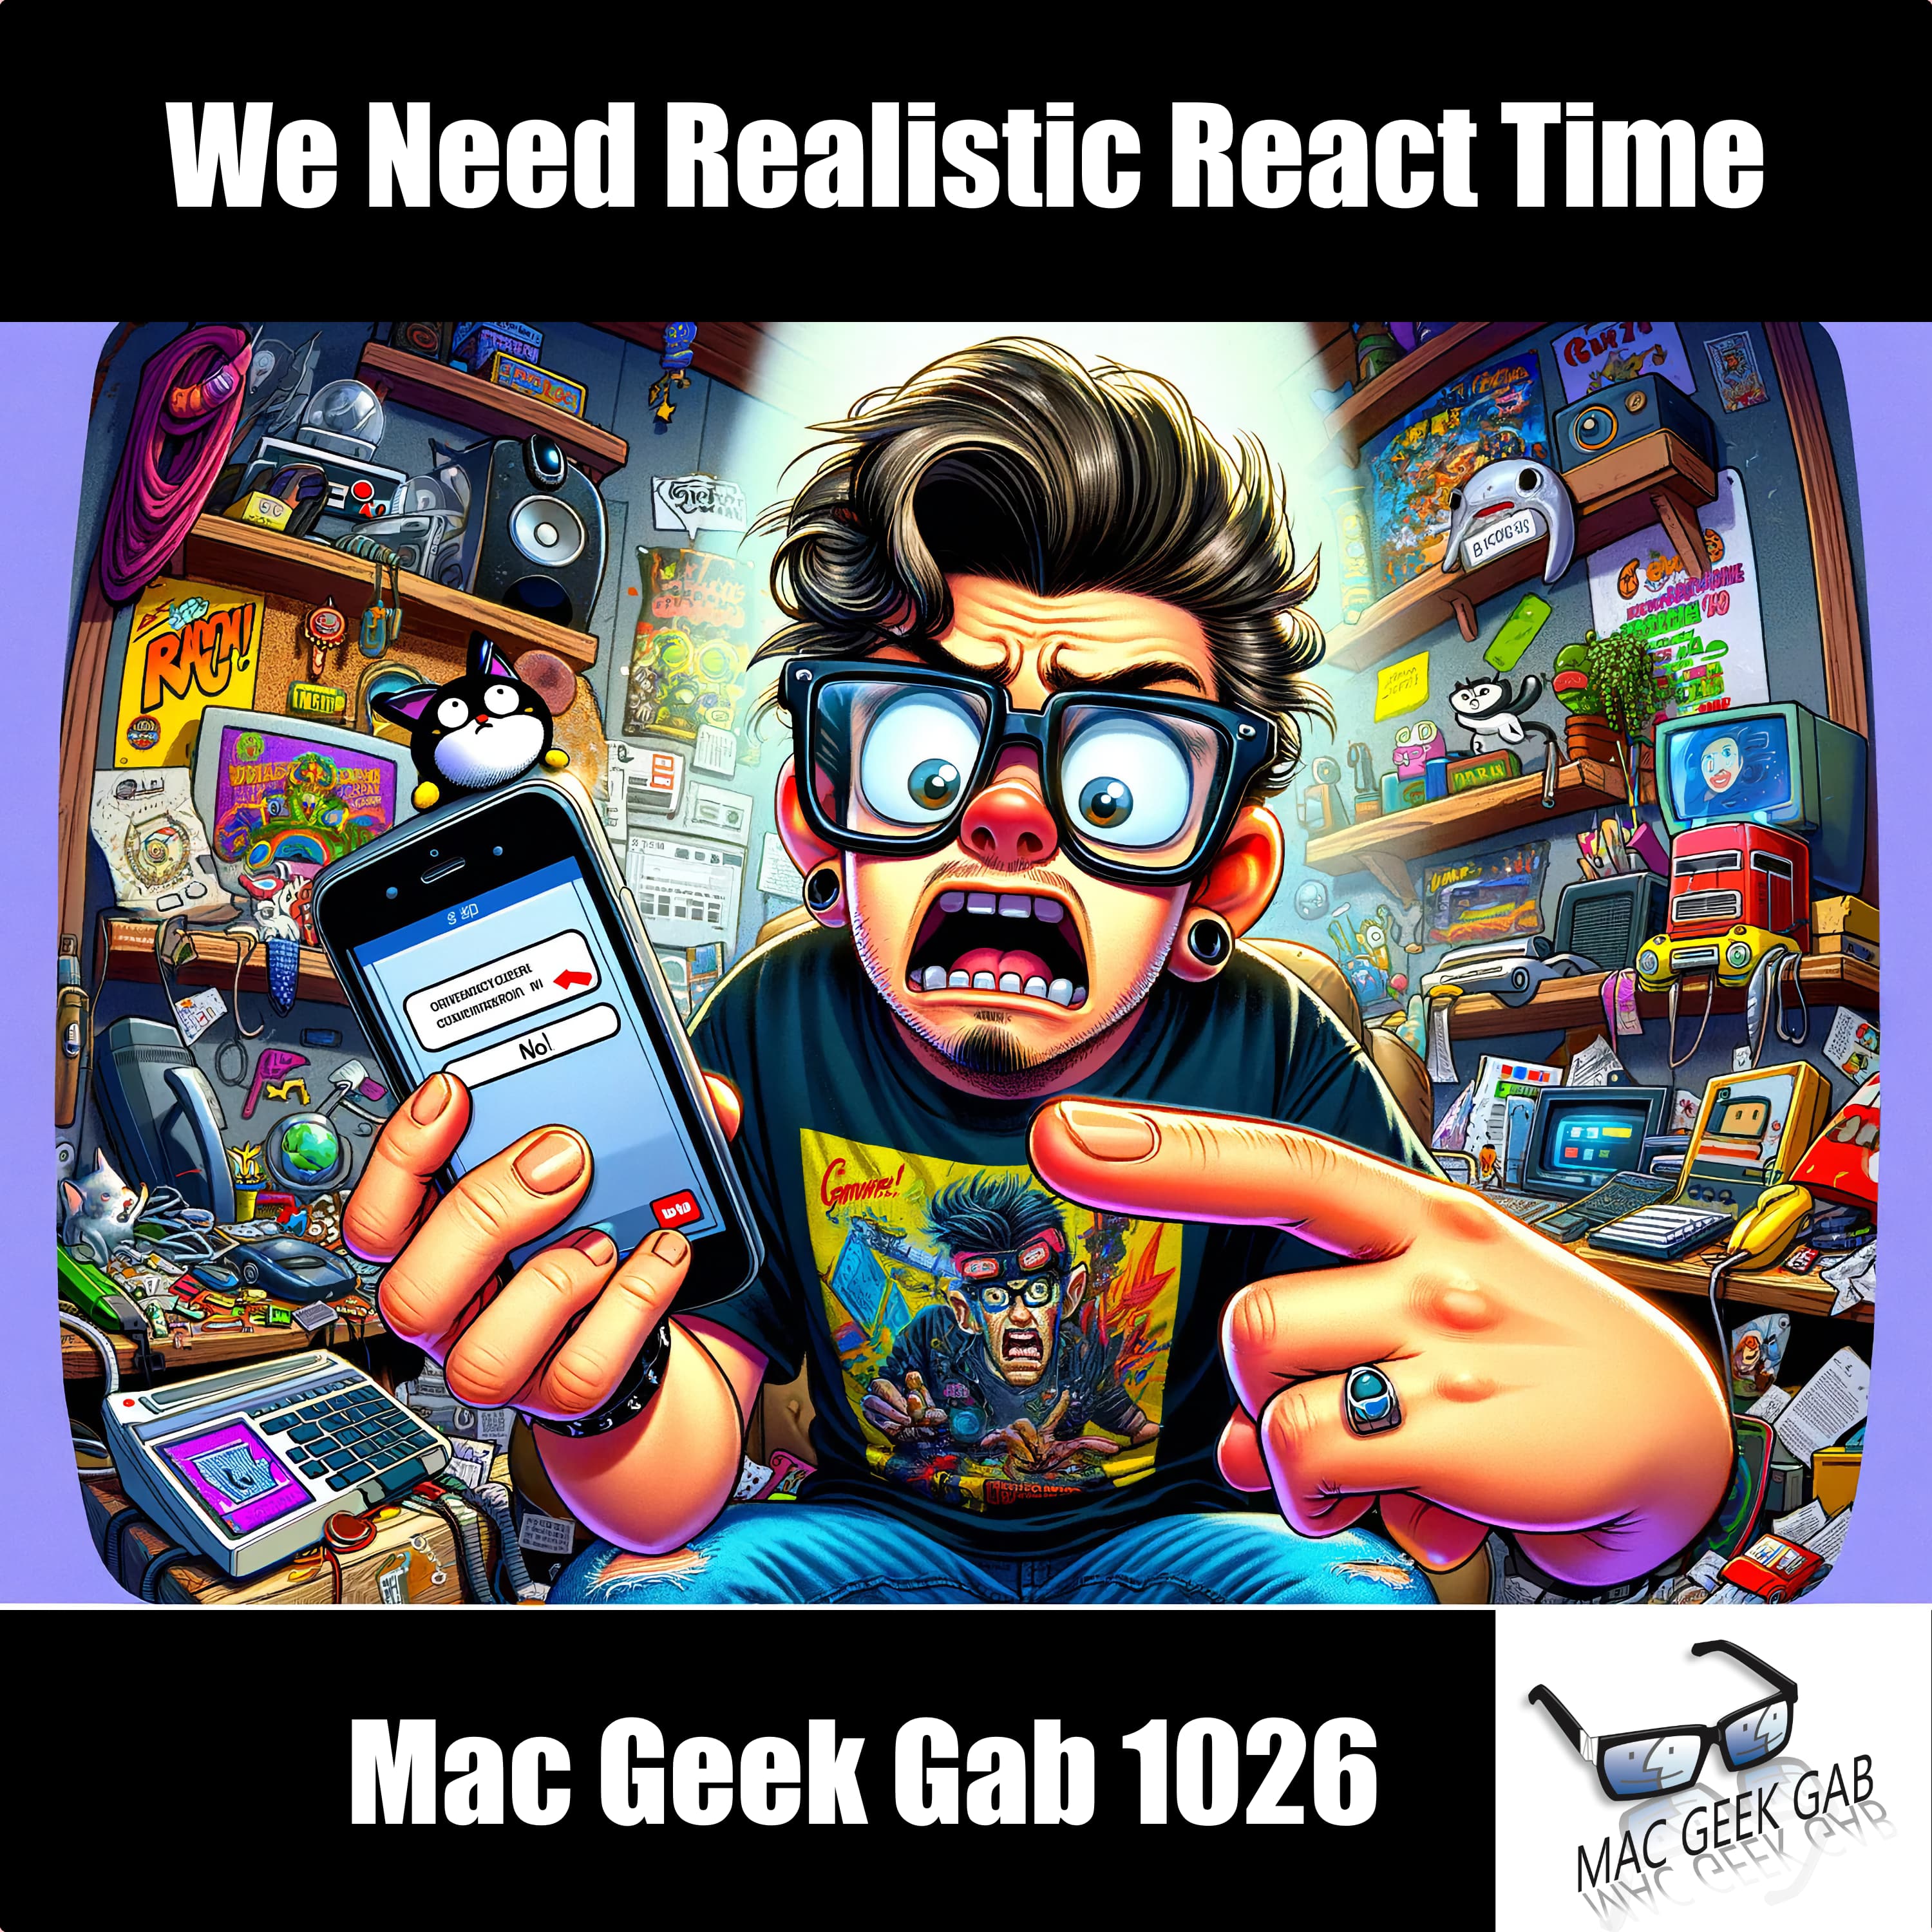 We Need Realistic React Time